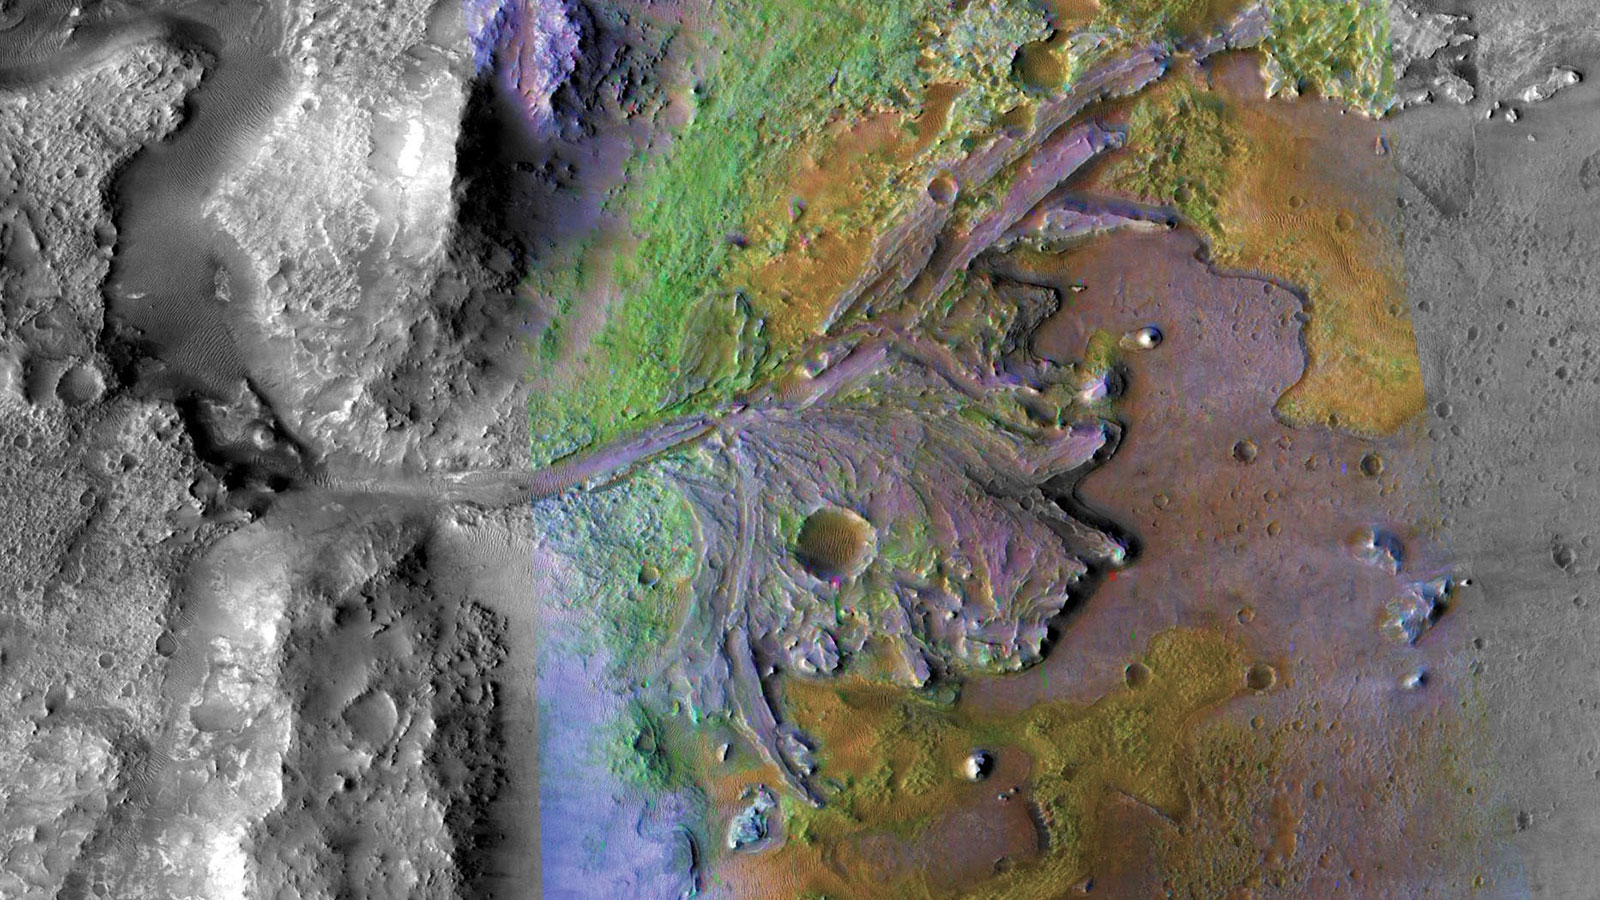 Water carved channels and transported sediments form fans and deltas within lake basins in this image of Mars' Jezero crater.